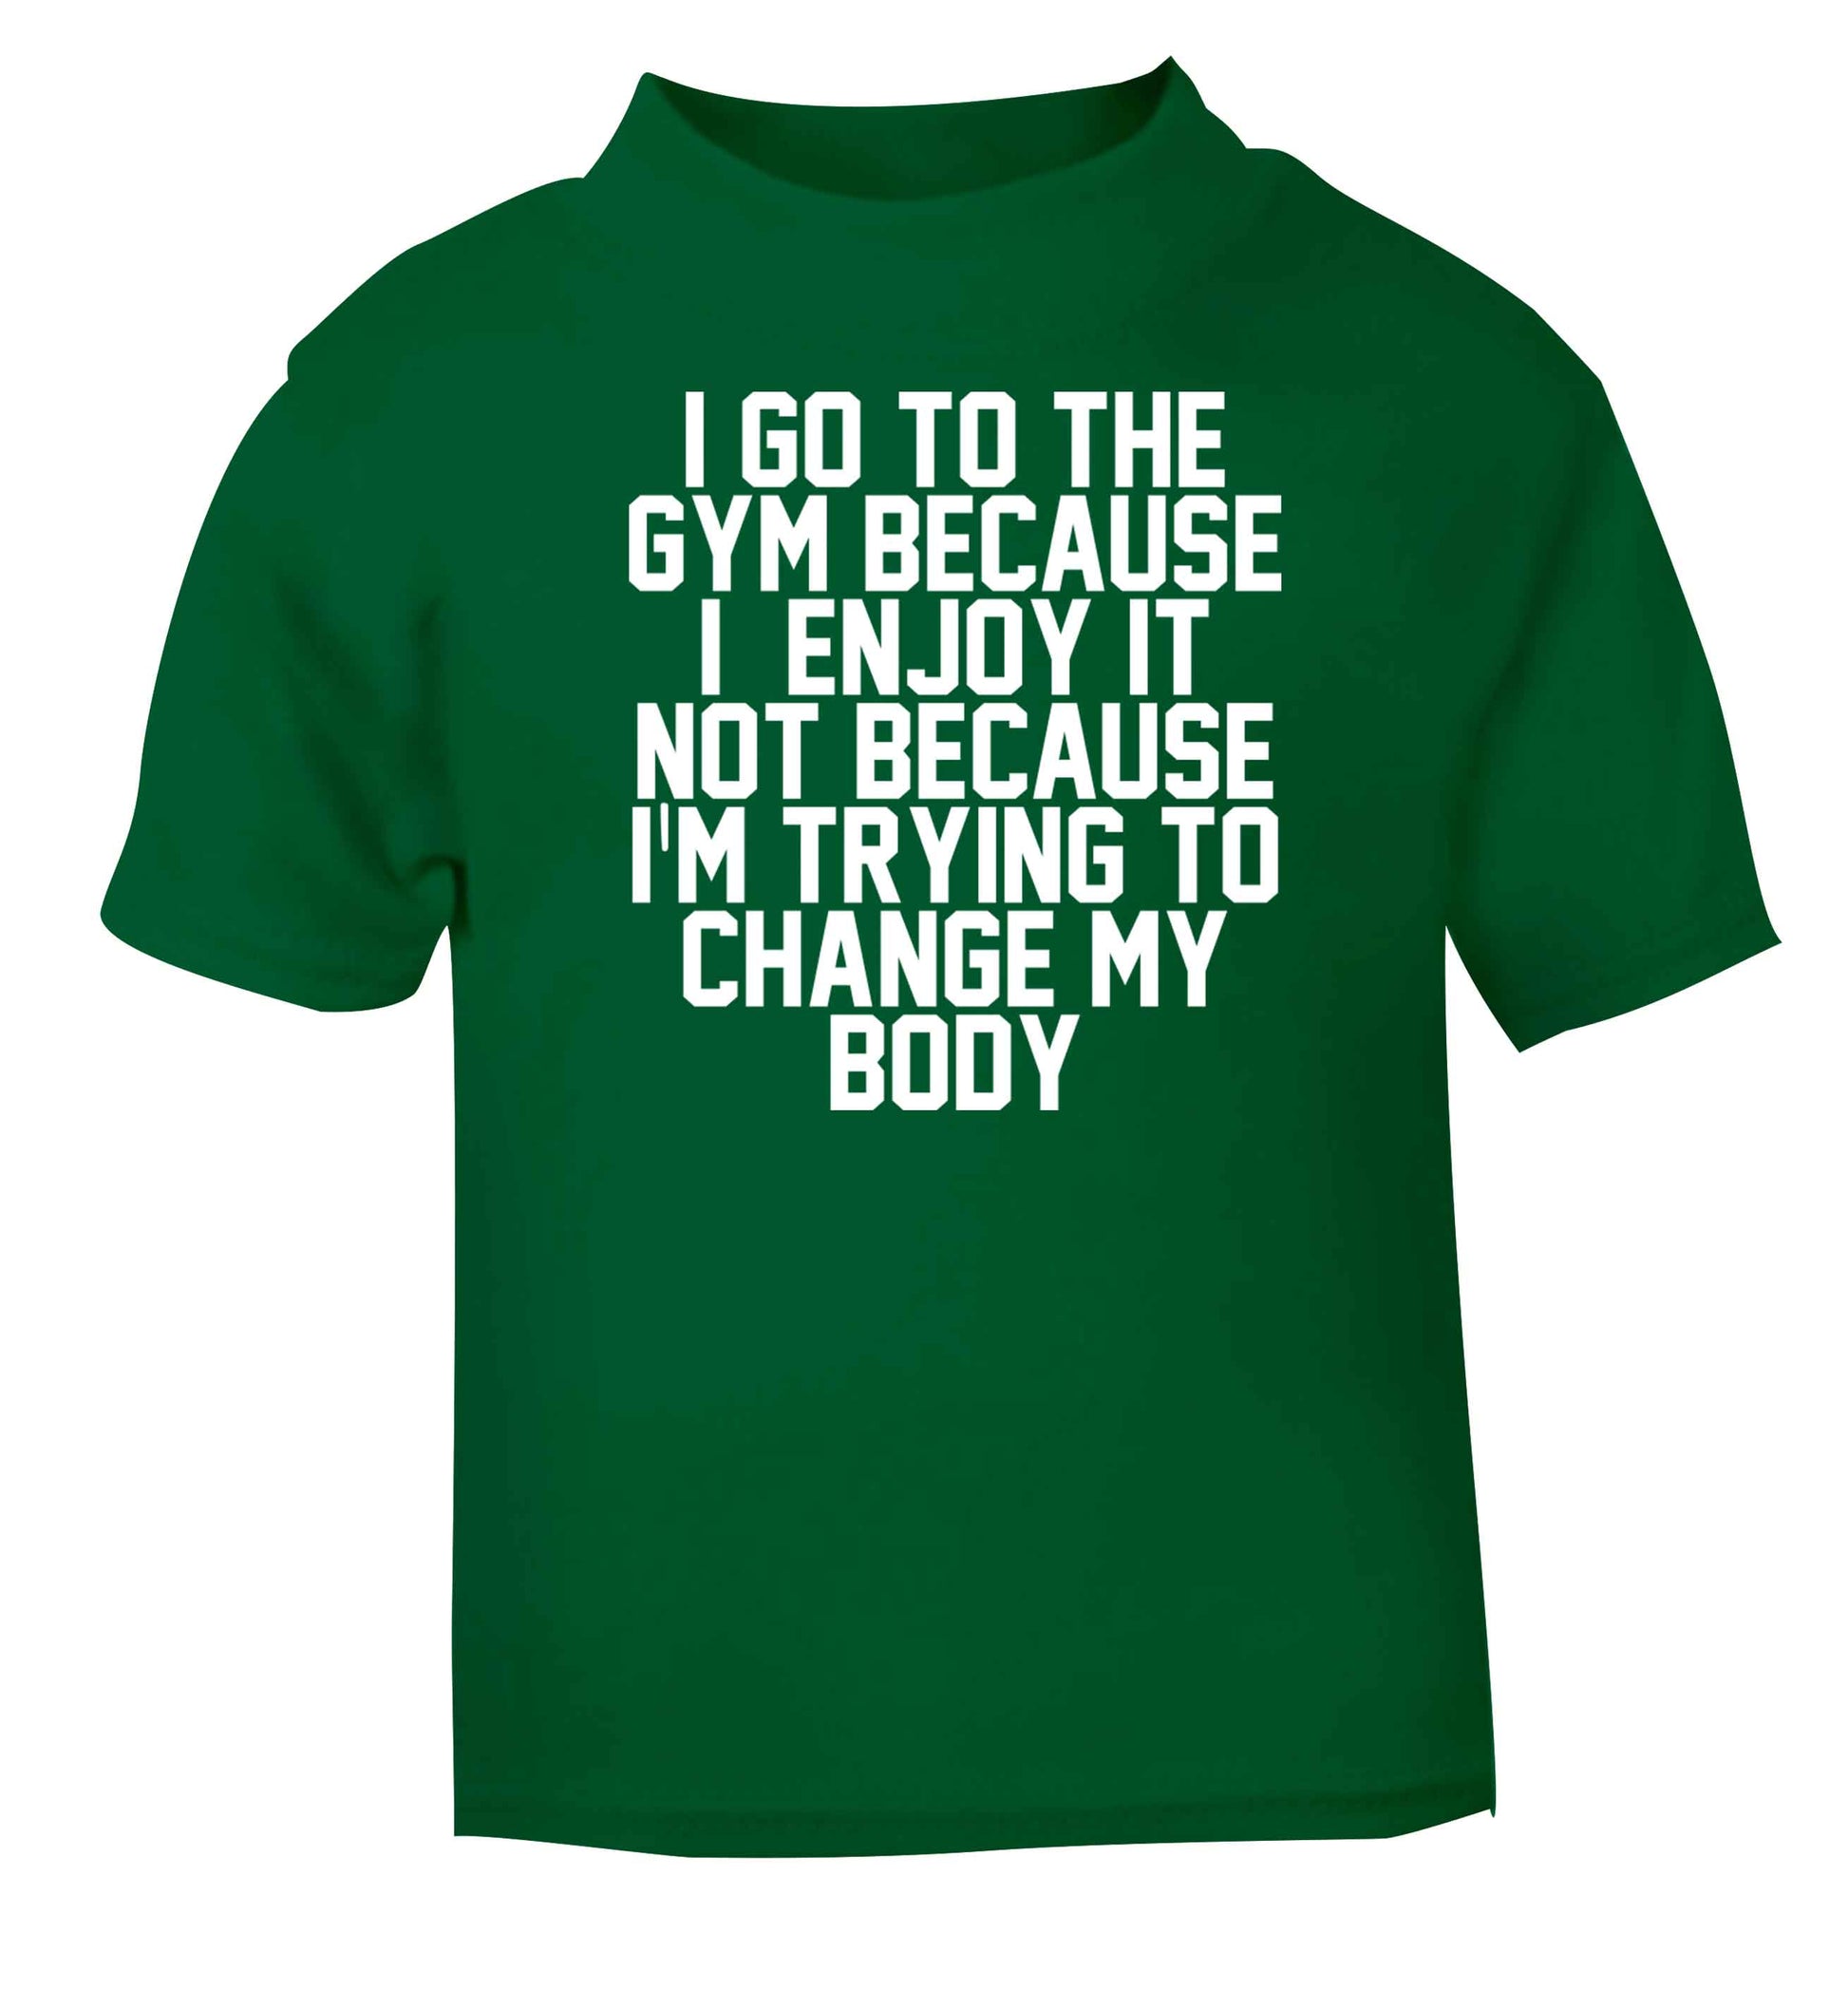 I go to the gym because I enjoy it not because I'm trying to change my body green baby toddler Tshirt 2 Years